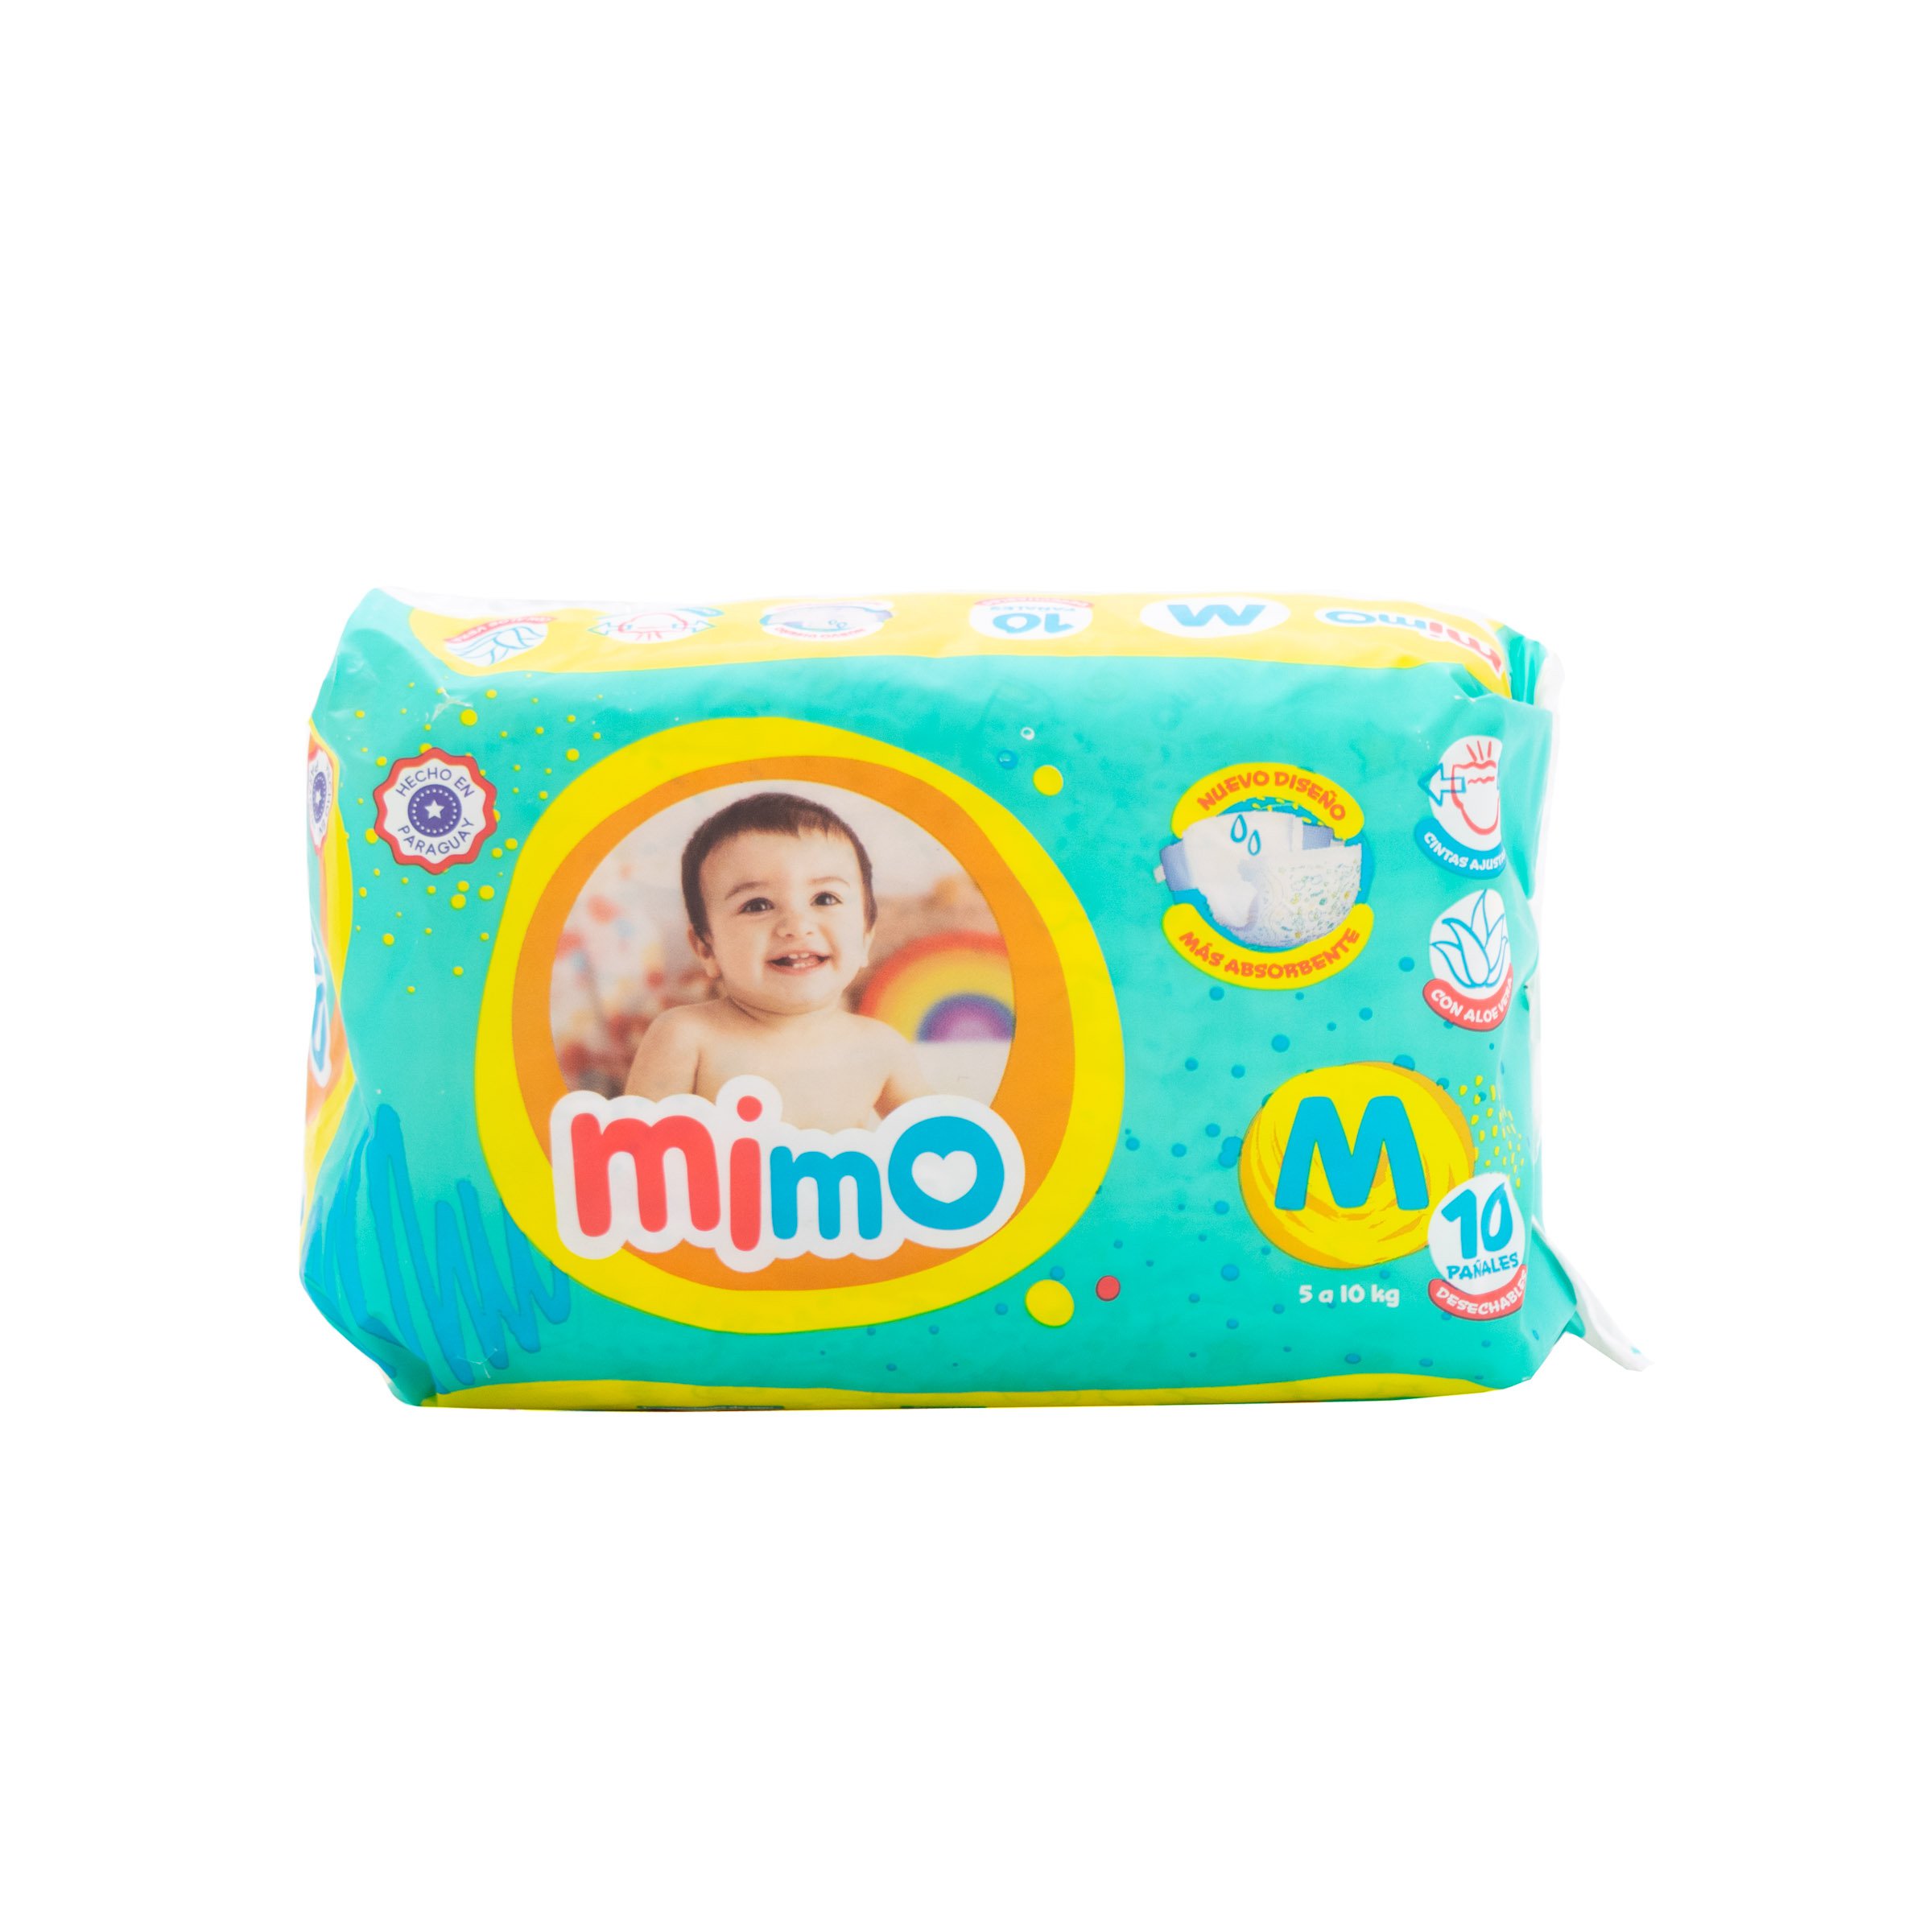 MIMO PANAL ECO M X 10 UNID